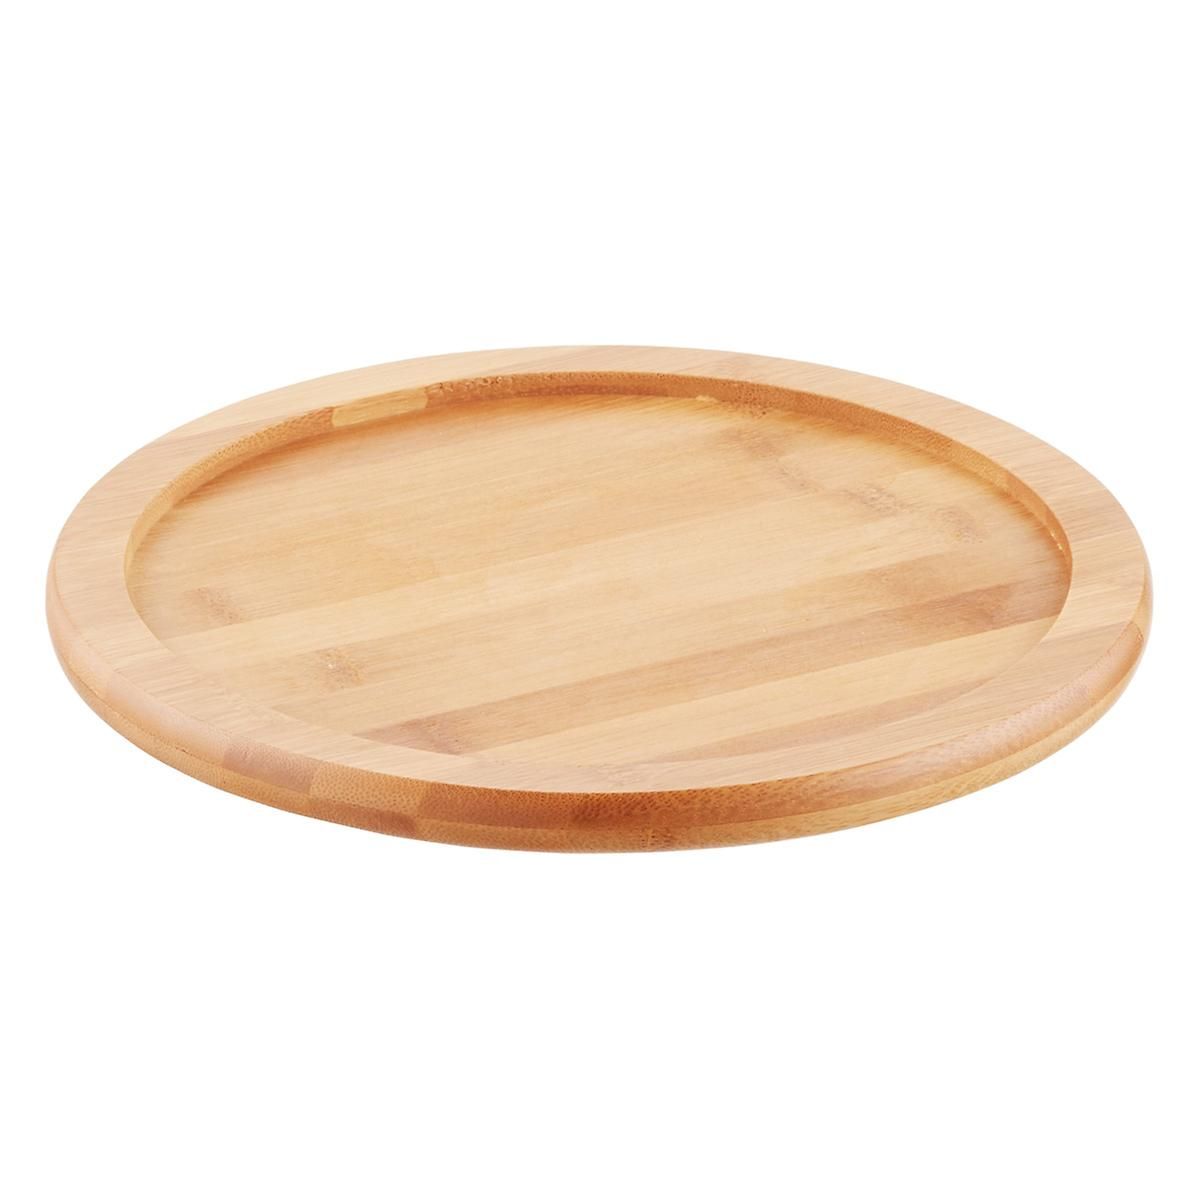 Bamboo Lazy Susan | The Container Store